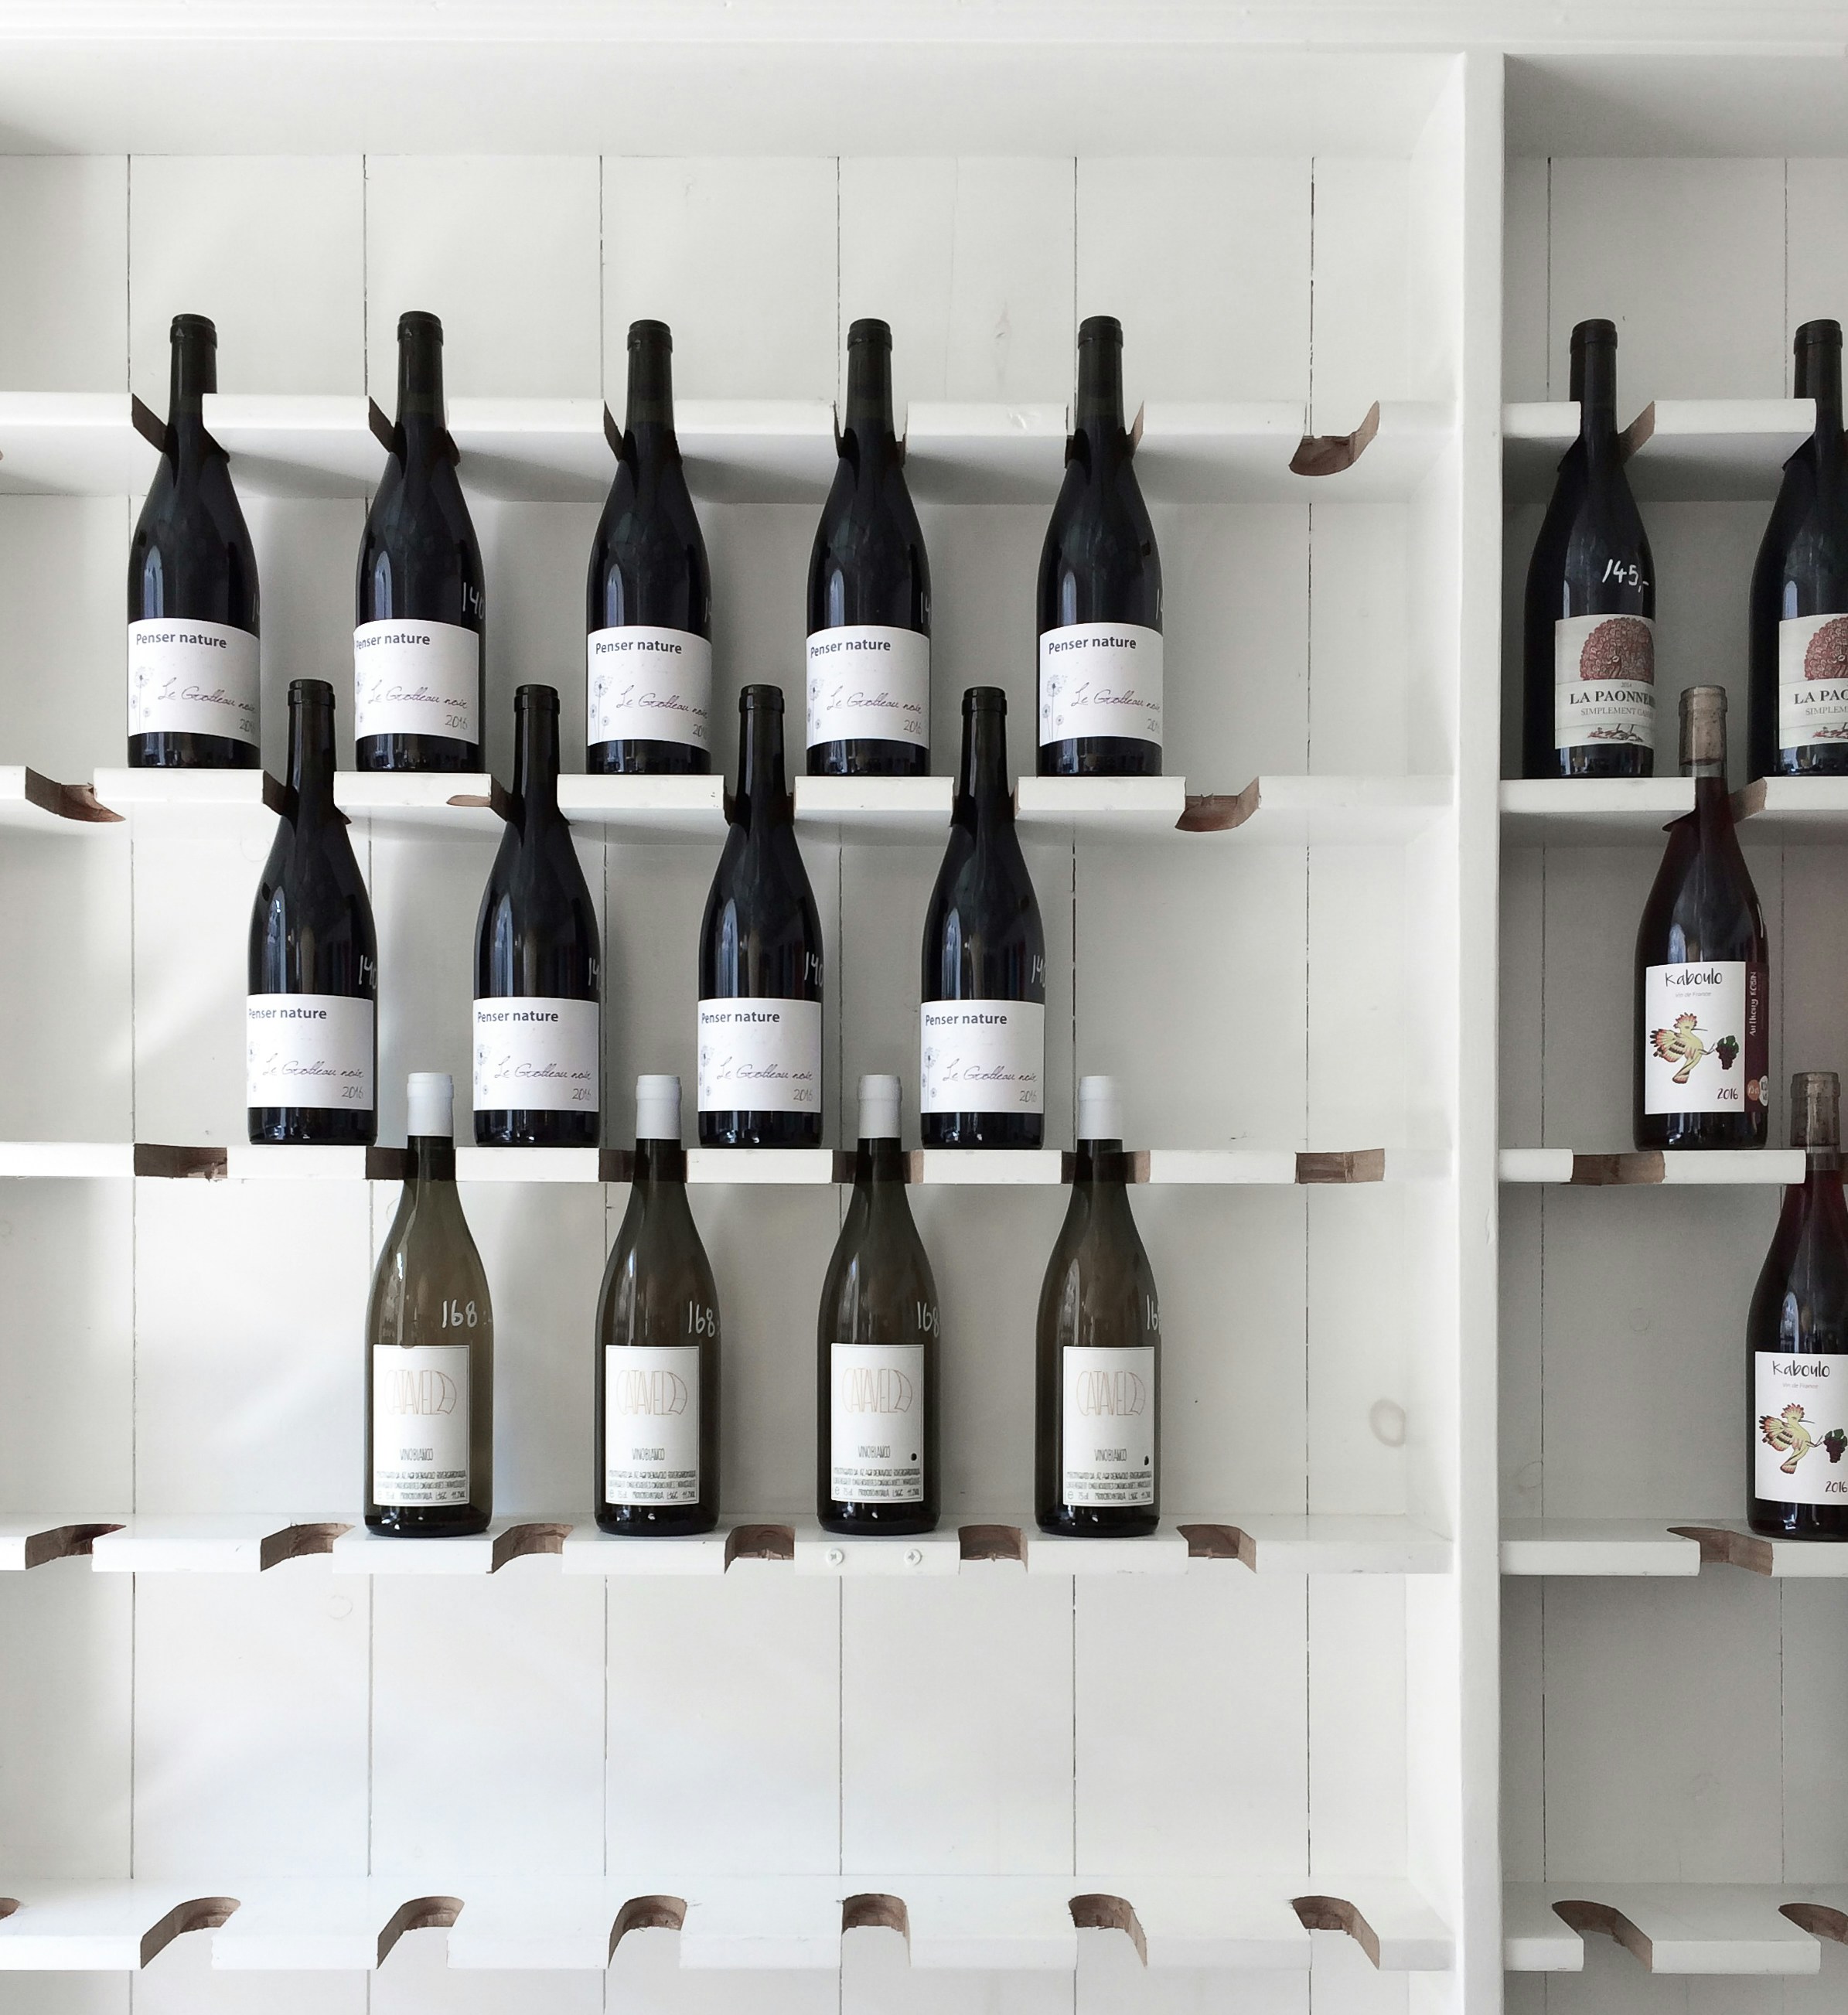 Does The Storage Time Of Wine Differ Based On Its Region?